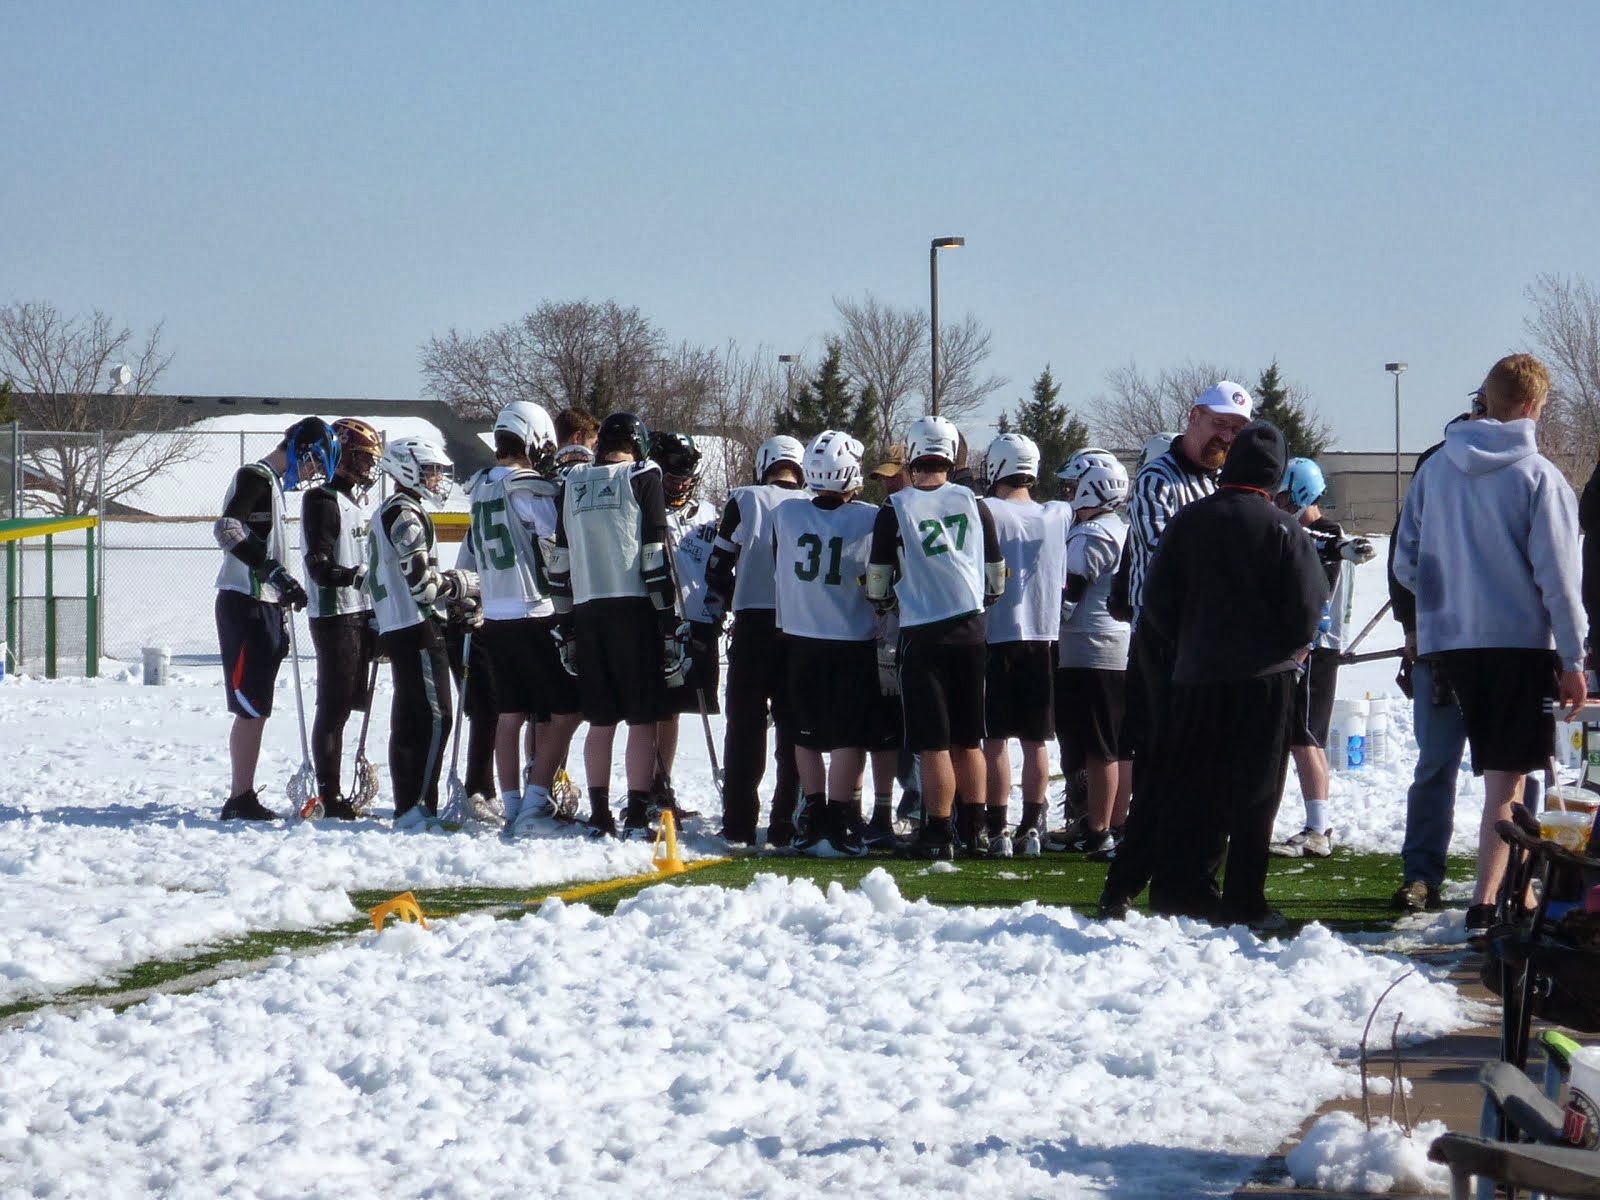 Lacrosse team getting ready to play in the snow. Dawson is #27.